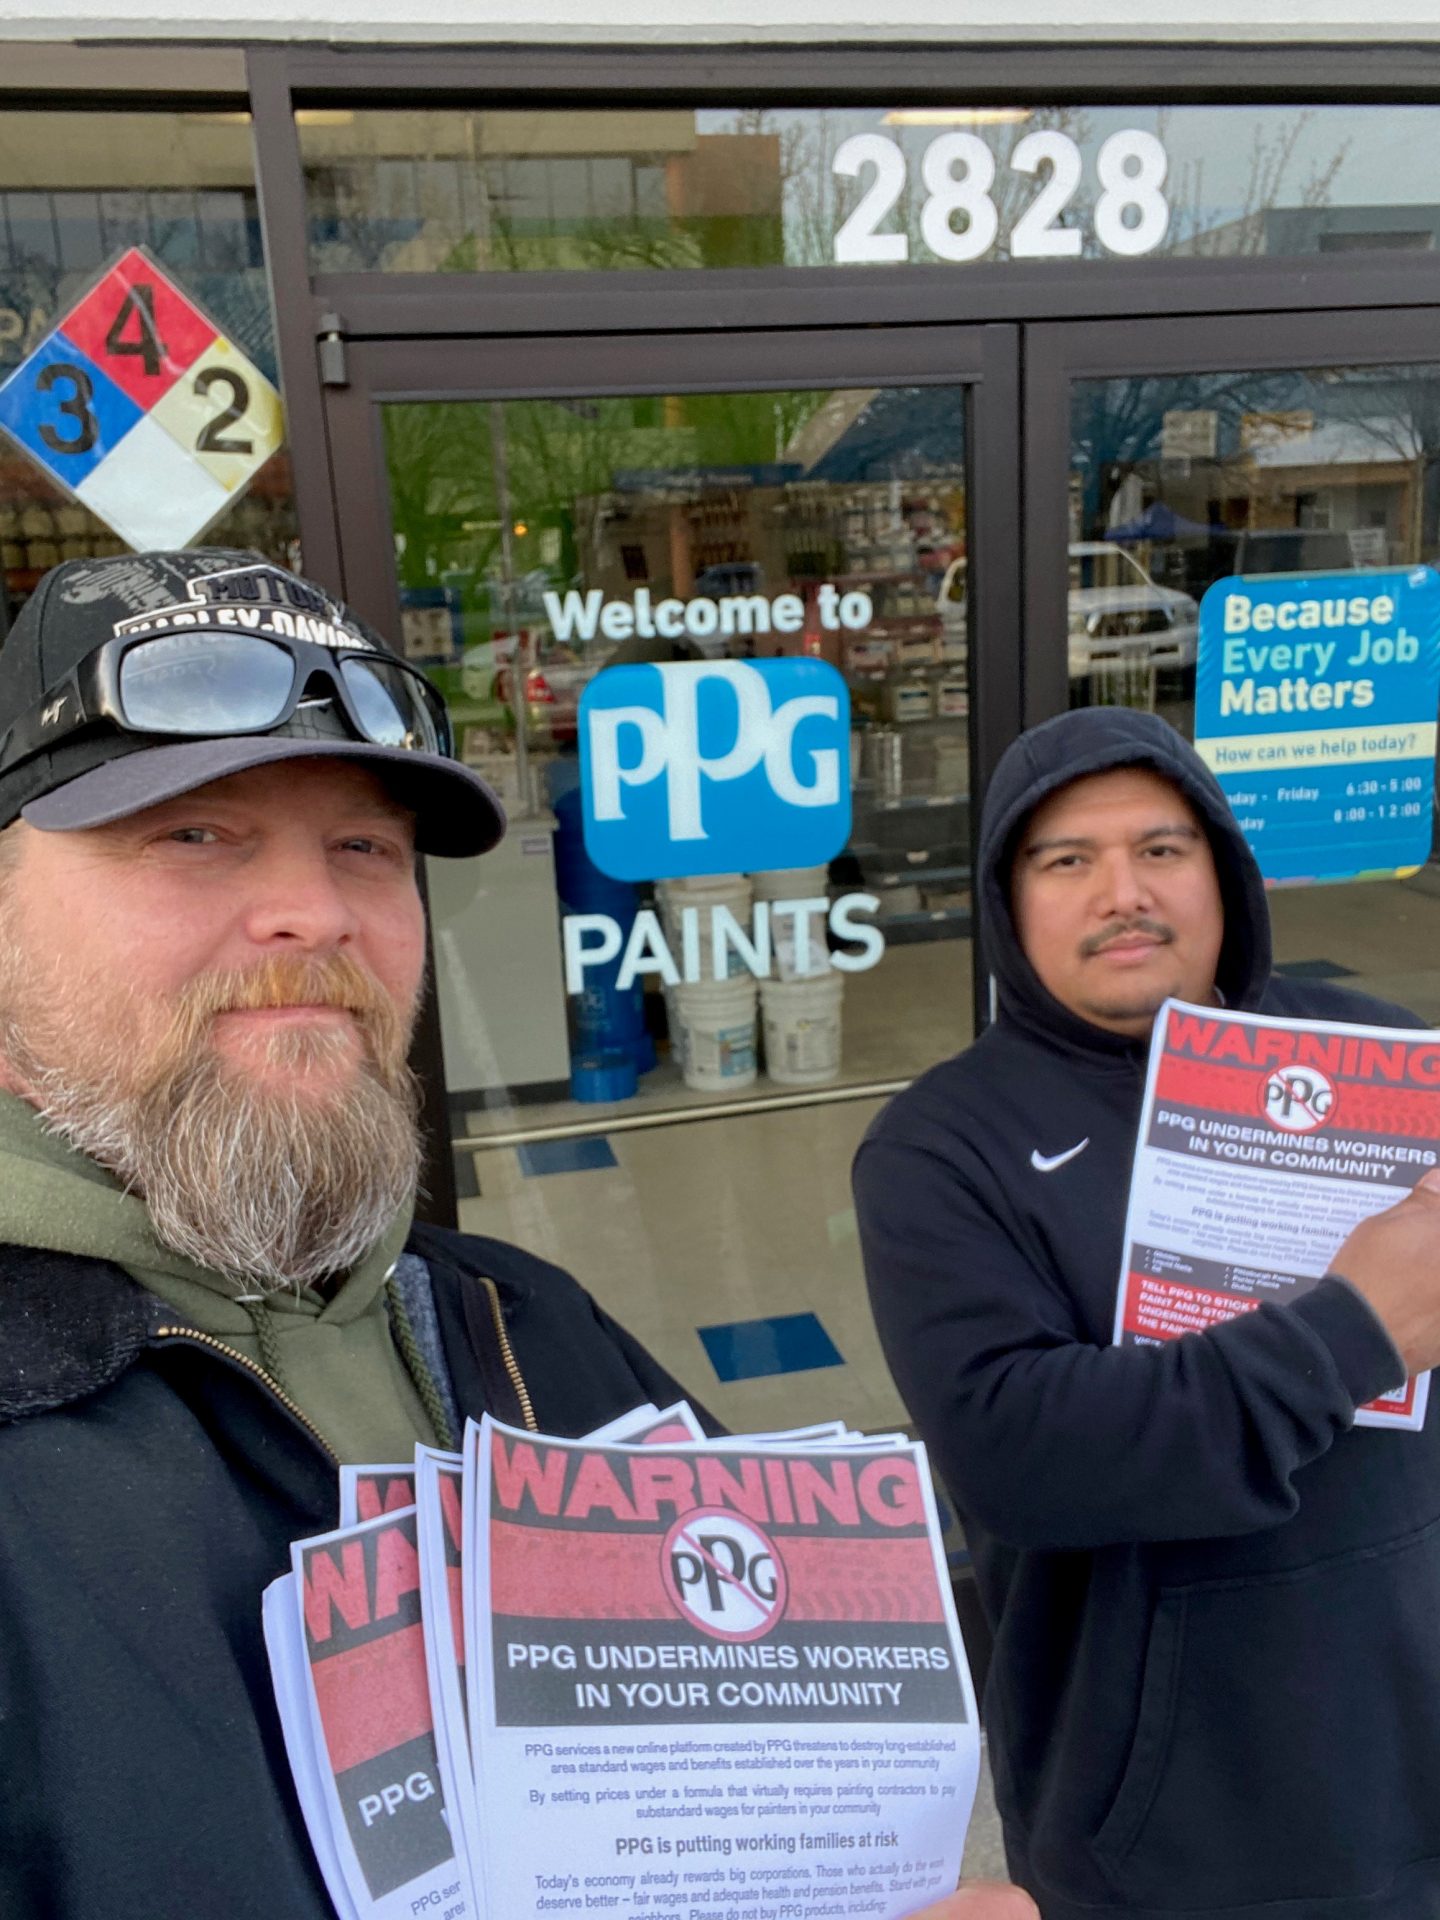 Image from the Gallery: PPG Day of Action – Northern, CA